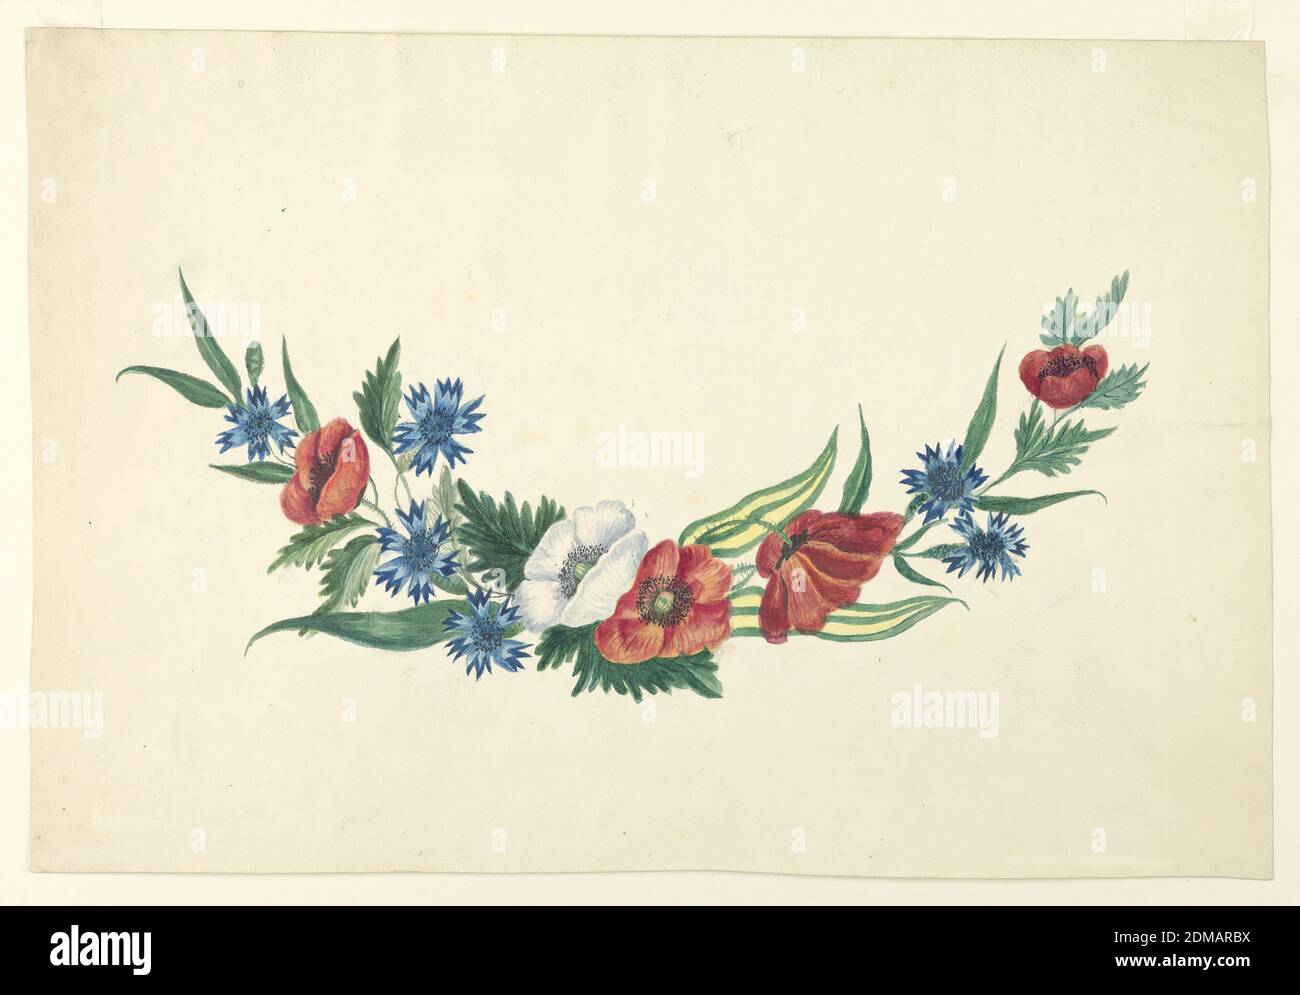 Segment of a Floral Wreath, Brush and watercolor on paper, Segment of a wreath of poppies and blue cornflowers., England, ca. 1802, Drawing Stock Photo